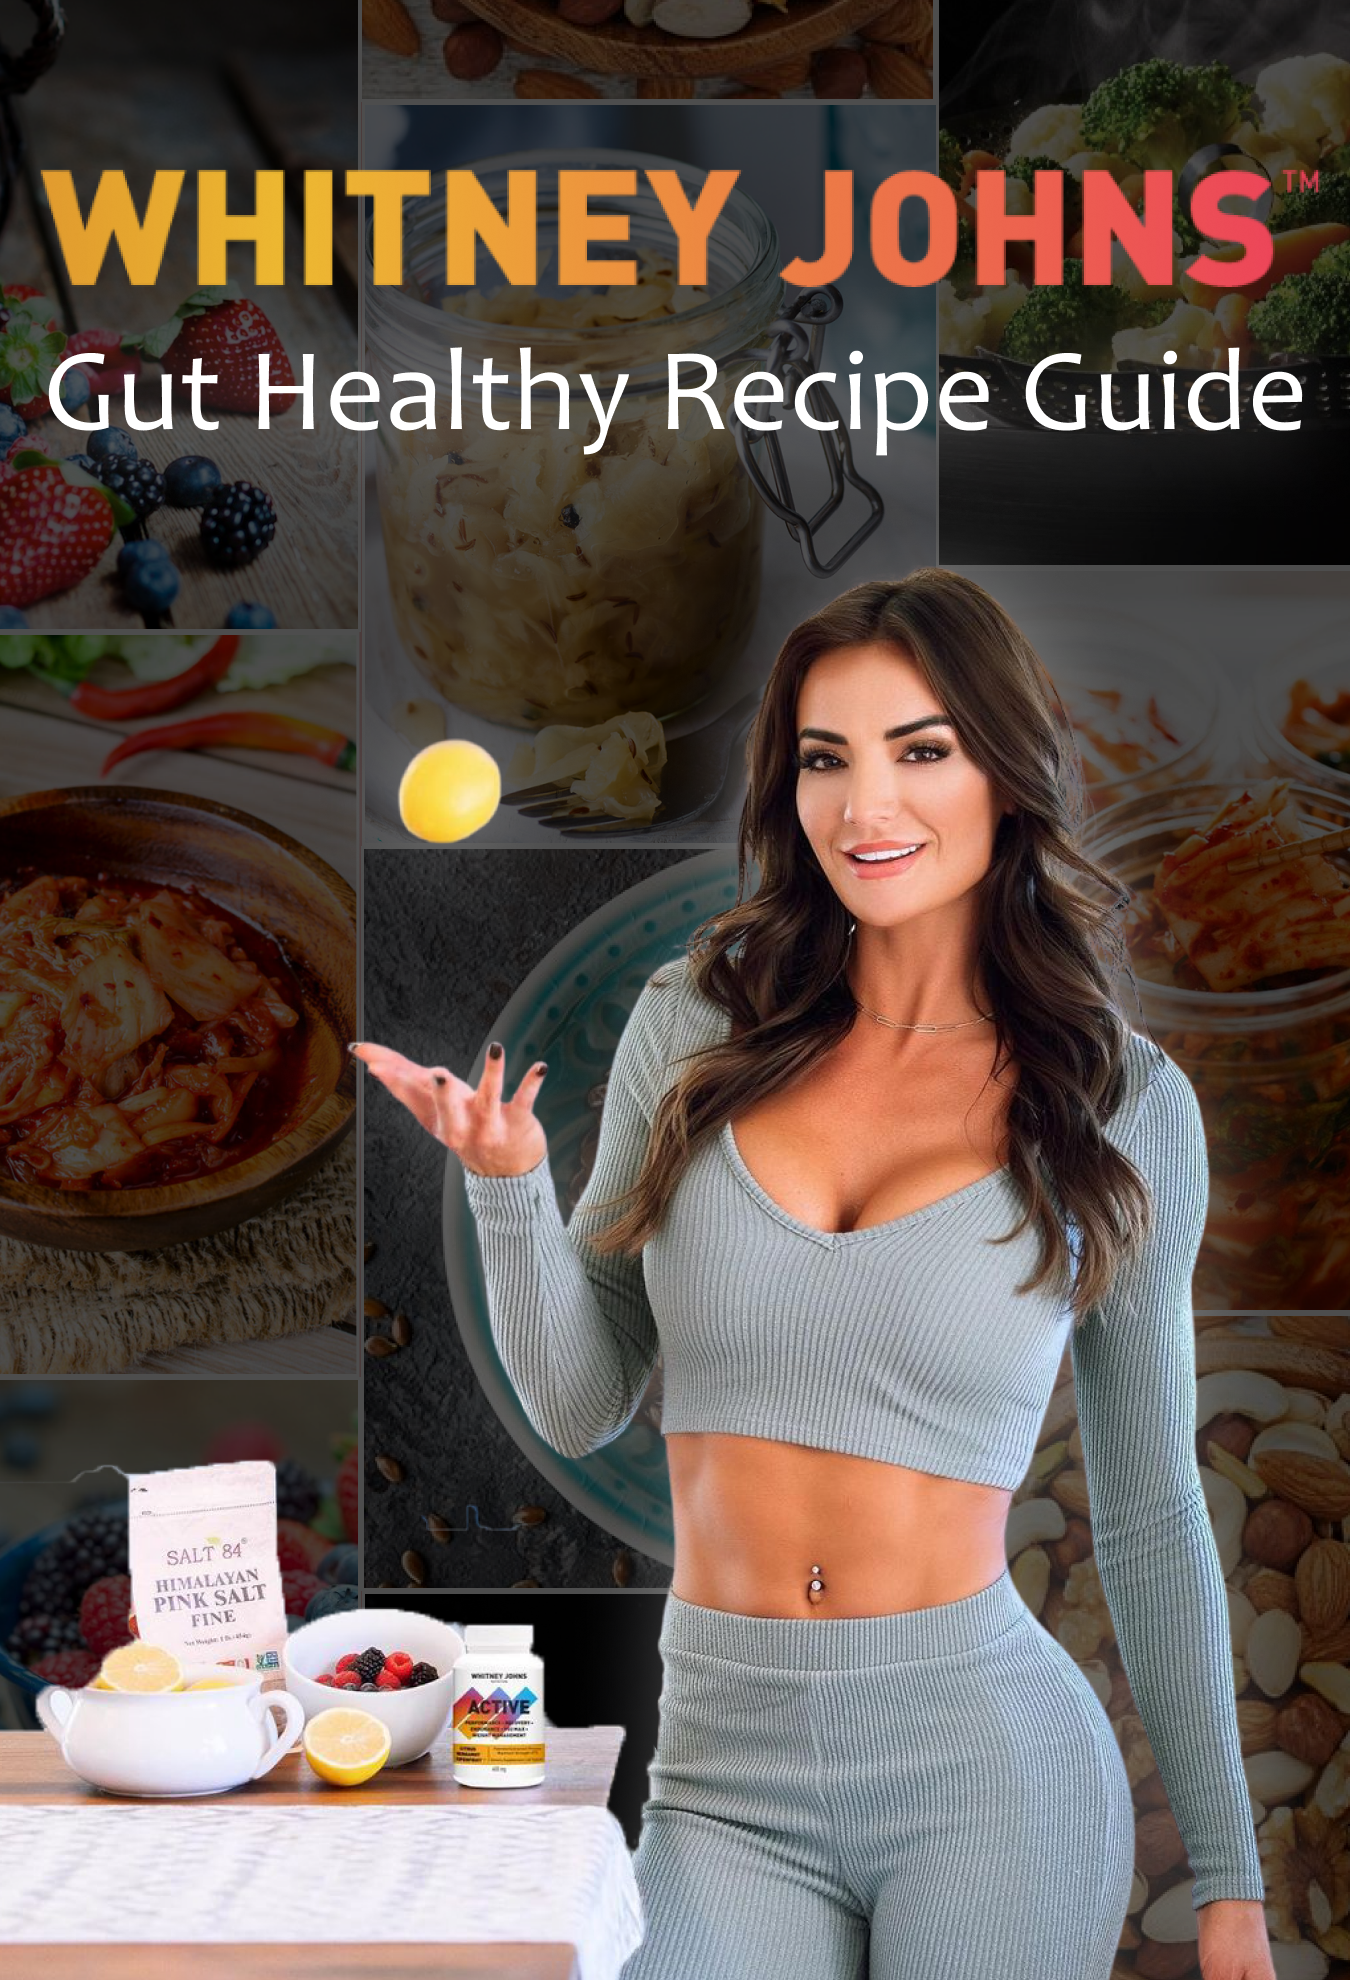 Recommended: Cookbooks & Nutrition Guides for The New Year